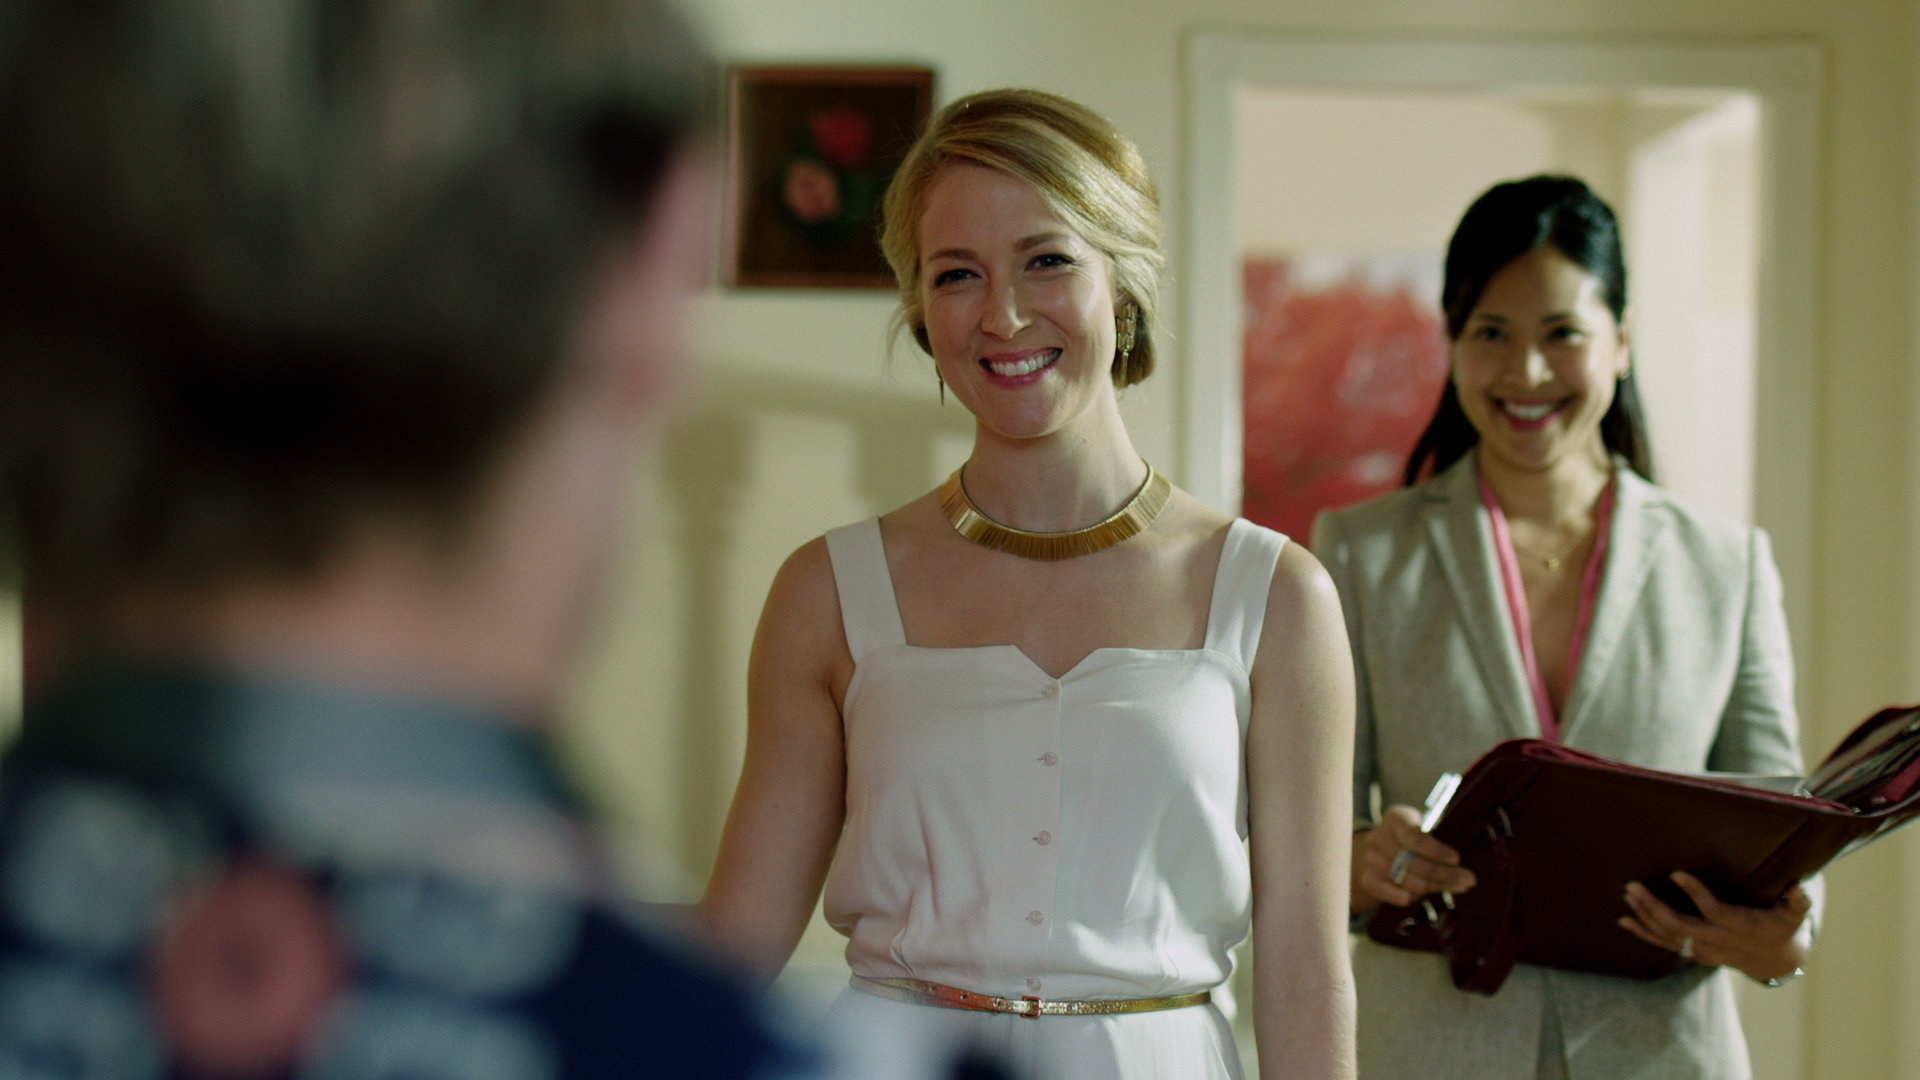 Mary-Bonner Baker and Mia Sun in The Slippery Slope (2013)